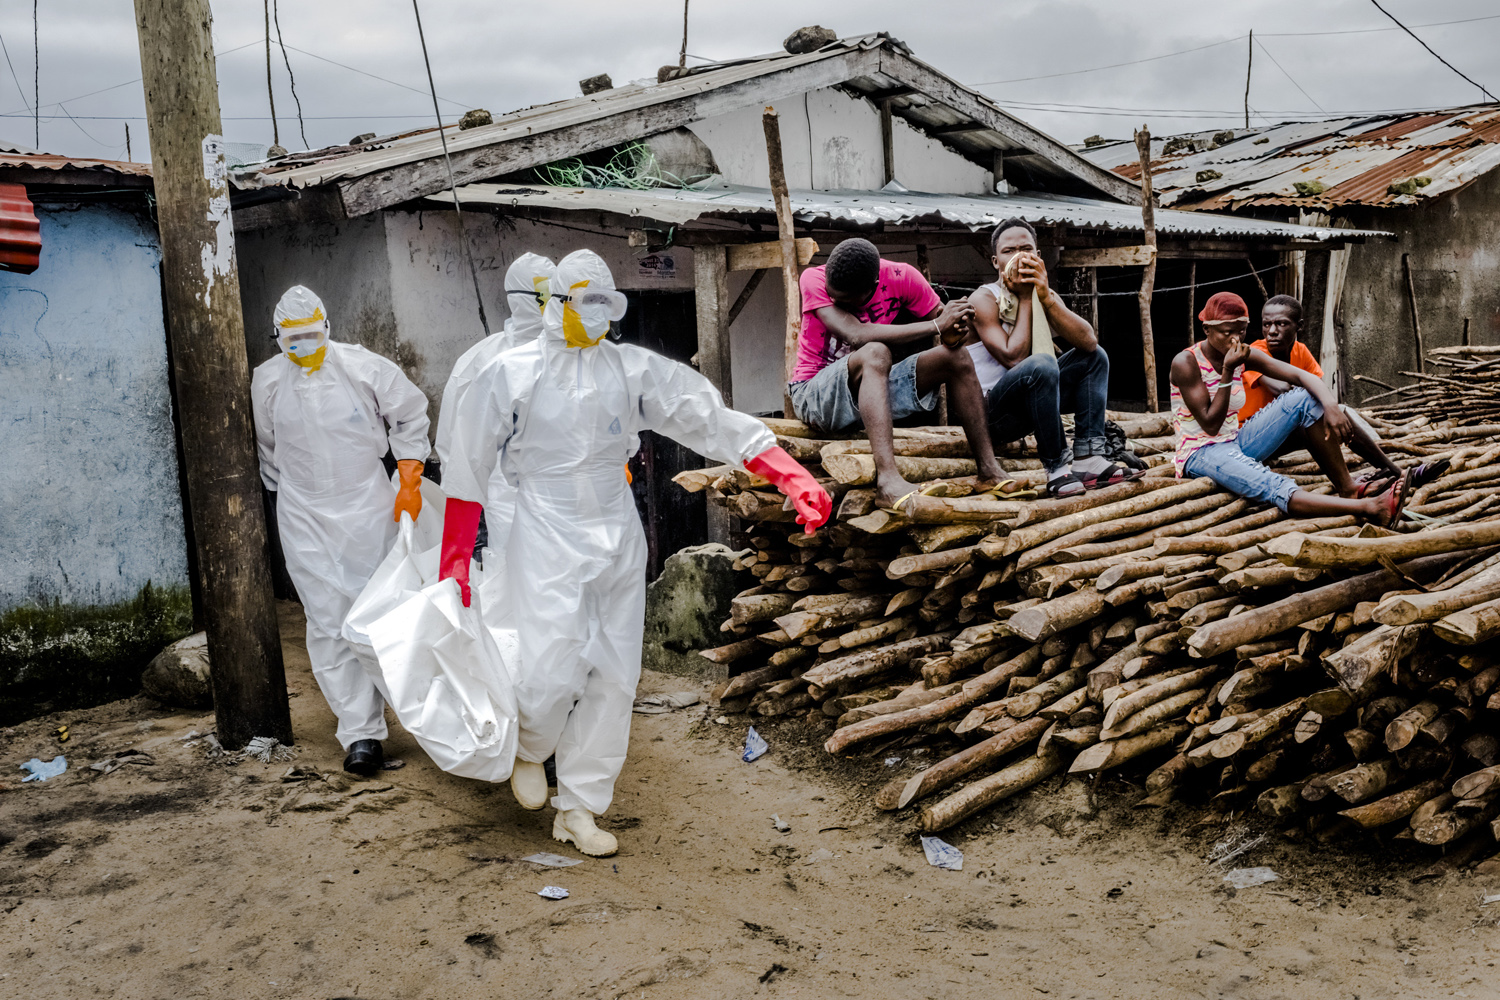 A burial team in protective clothing removes the body an Ebola victim from an isolation ward in Monrovia, Liberia.